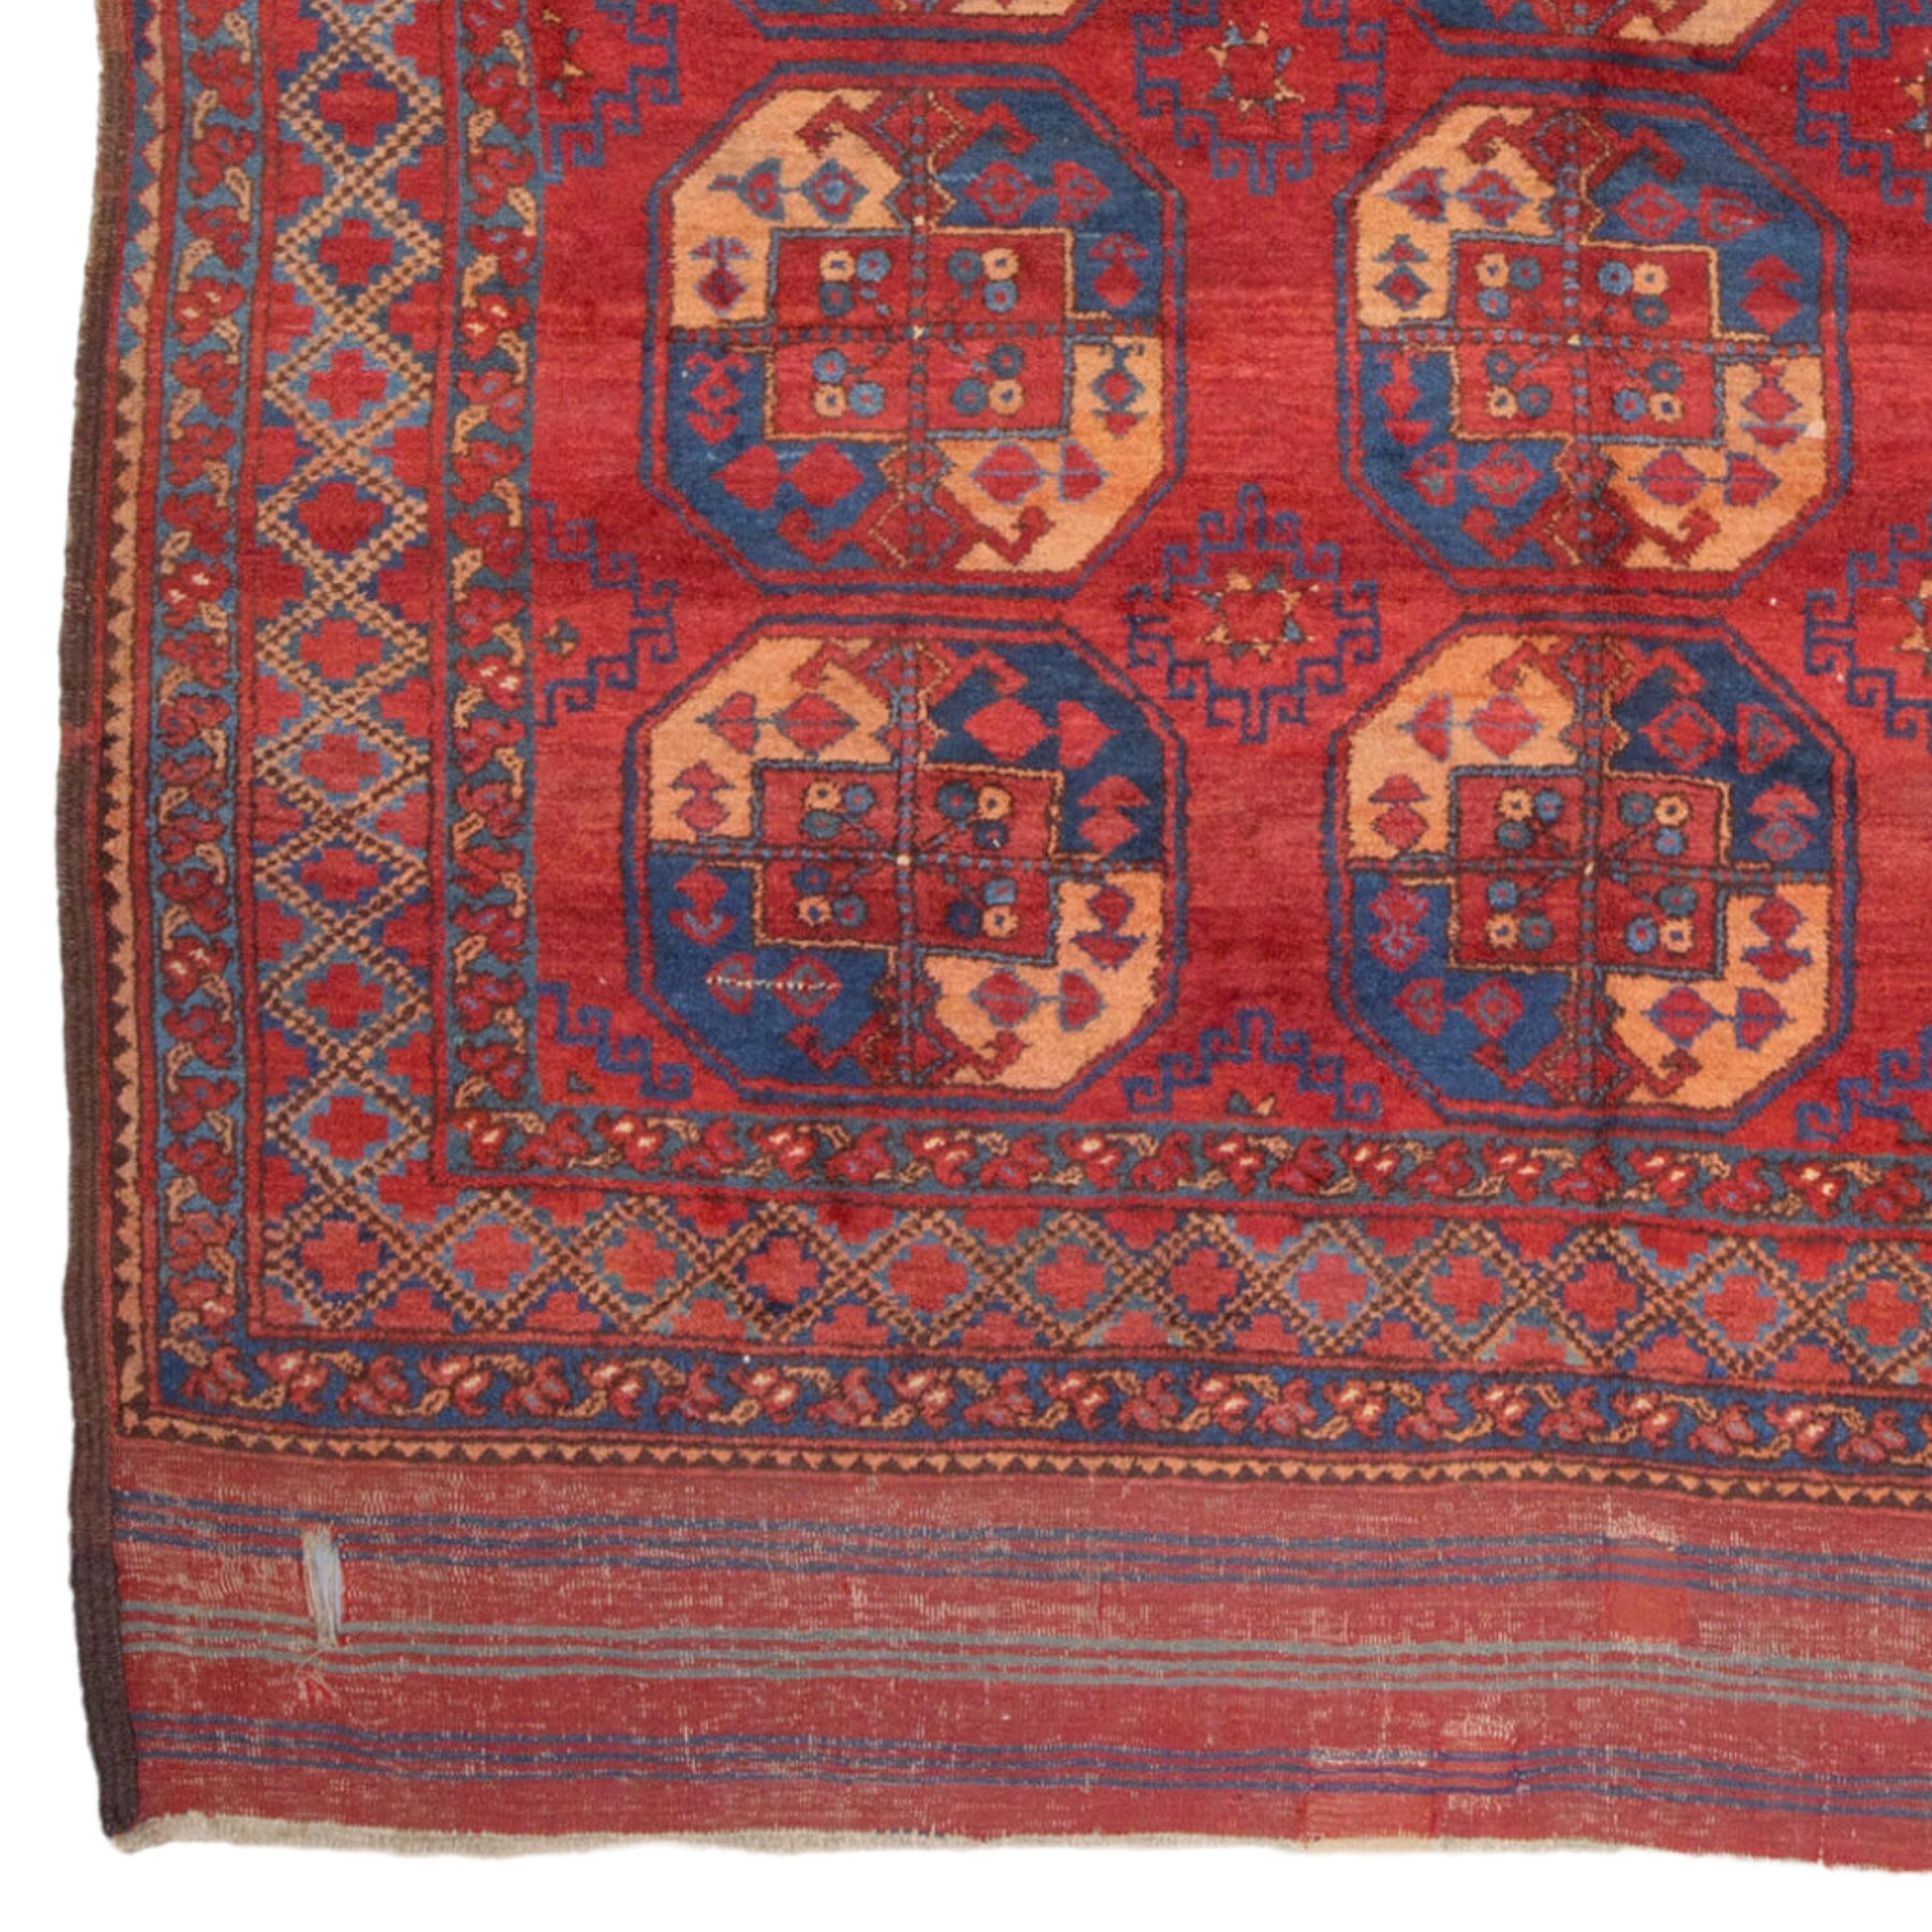 19th Century Turkmen Ersari Main Rug
Size 225 x 280 cm (7,38 - 9,18 ft)

It is a hand-knotted tribal carpet made entirely of natural dyes and hand-woven wool. This rug was woven as part of a project that pays homage to the traditional Ersari Turkmen